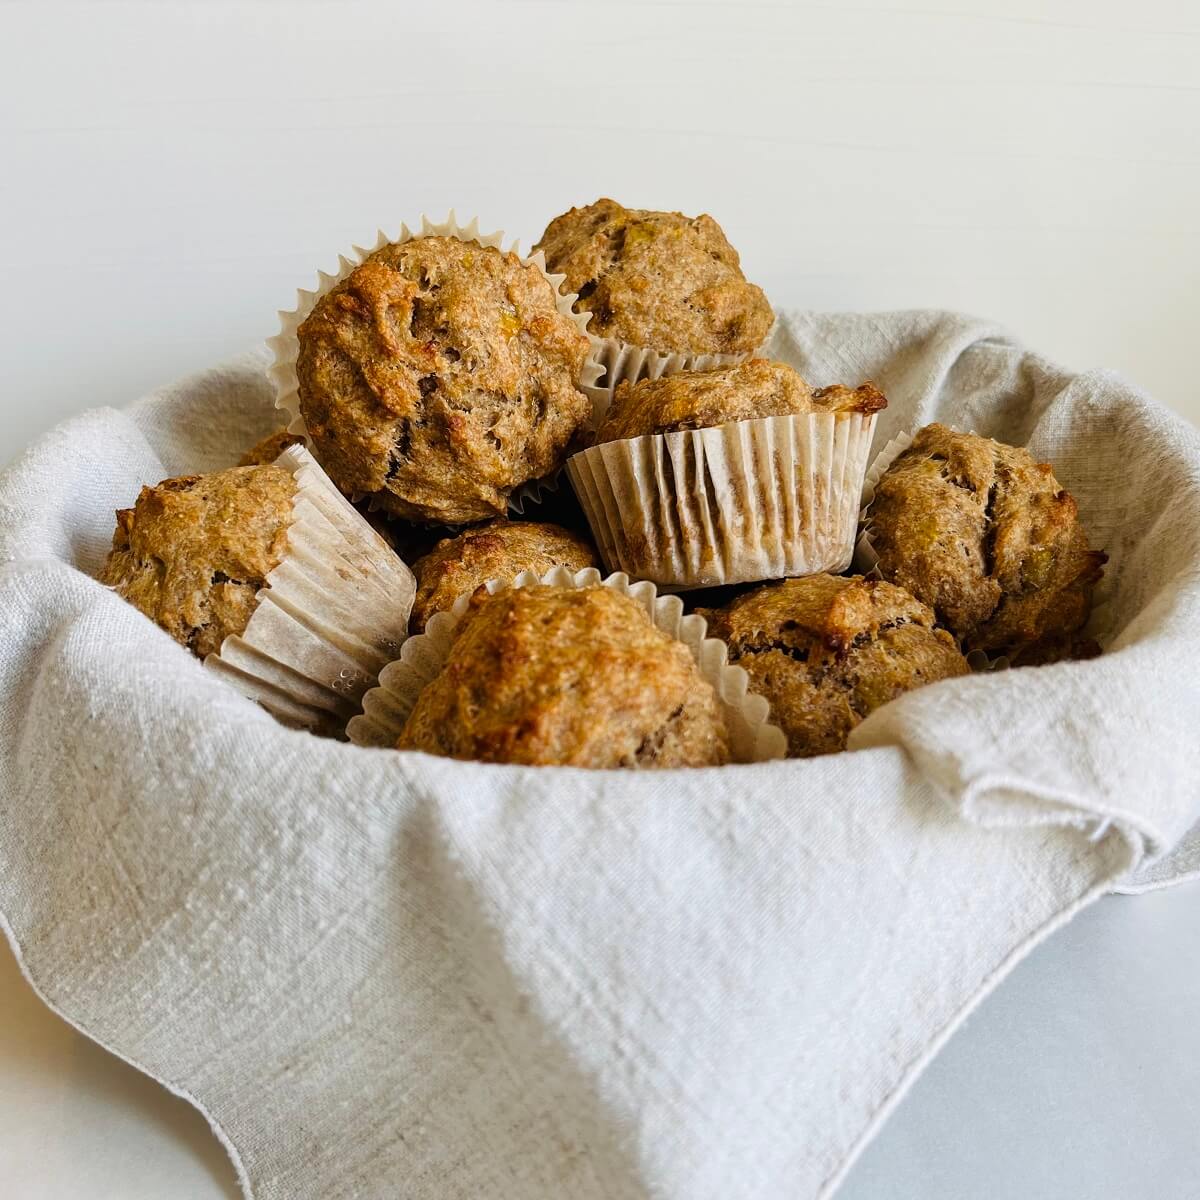 Maple sweetened banana muffins piled in a basket lined with a linen napkin.